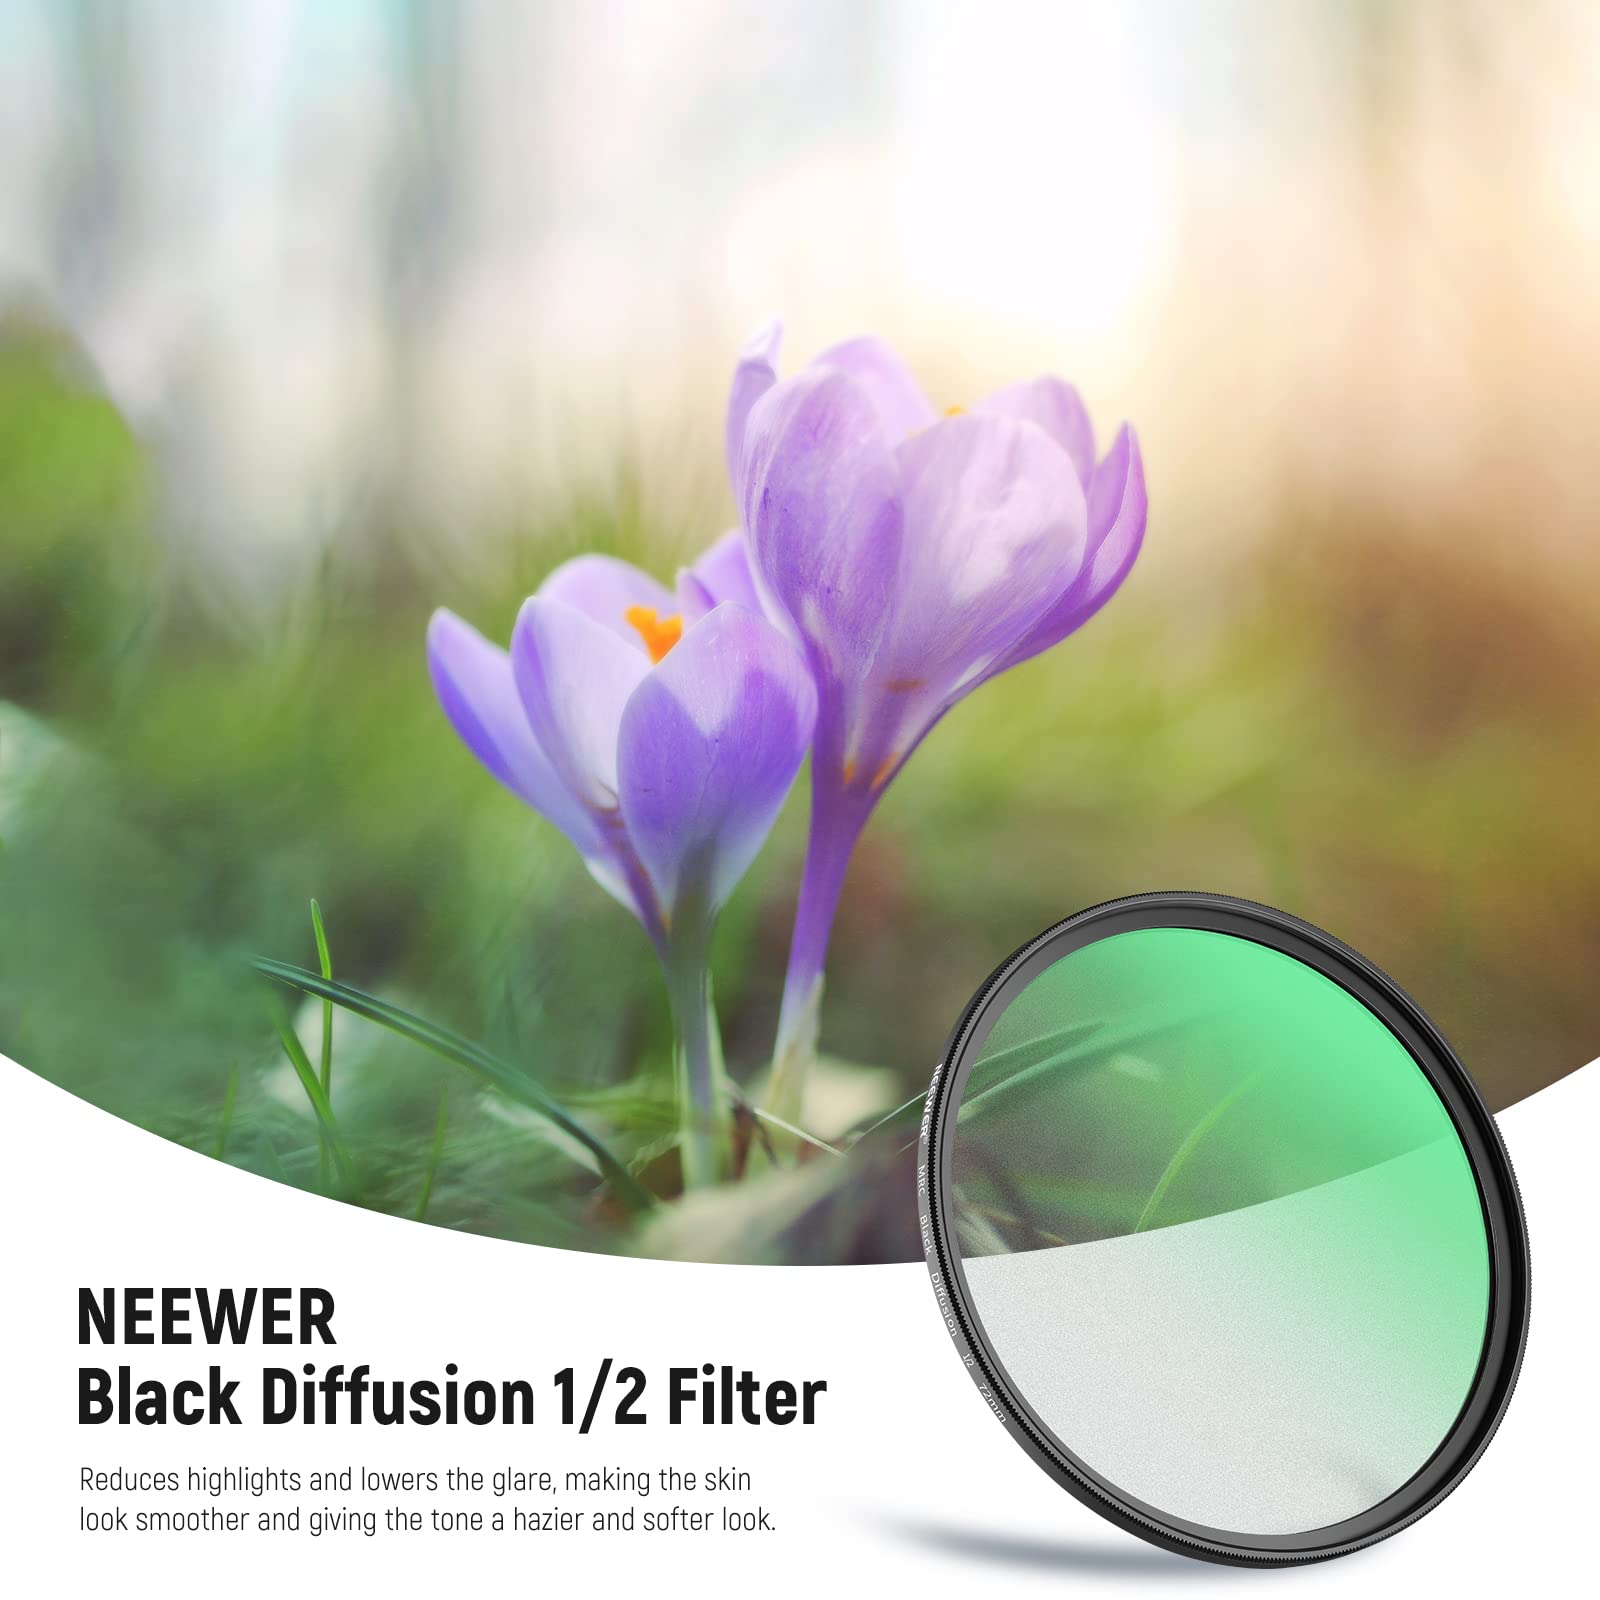 NEEWER 72mm Black Diffusion 1/2 Filter Mist Dreamy Cinematic Effect Filter Ultra Slim Water Repellent Scratch Resistant HD Optical Glass, 30 Layers Nano Coatings for Video/Vlog/Portrait Photography